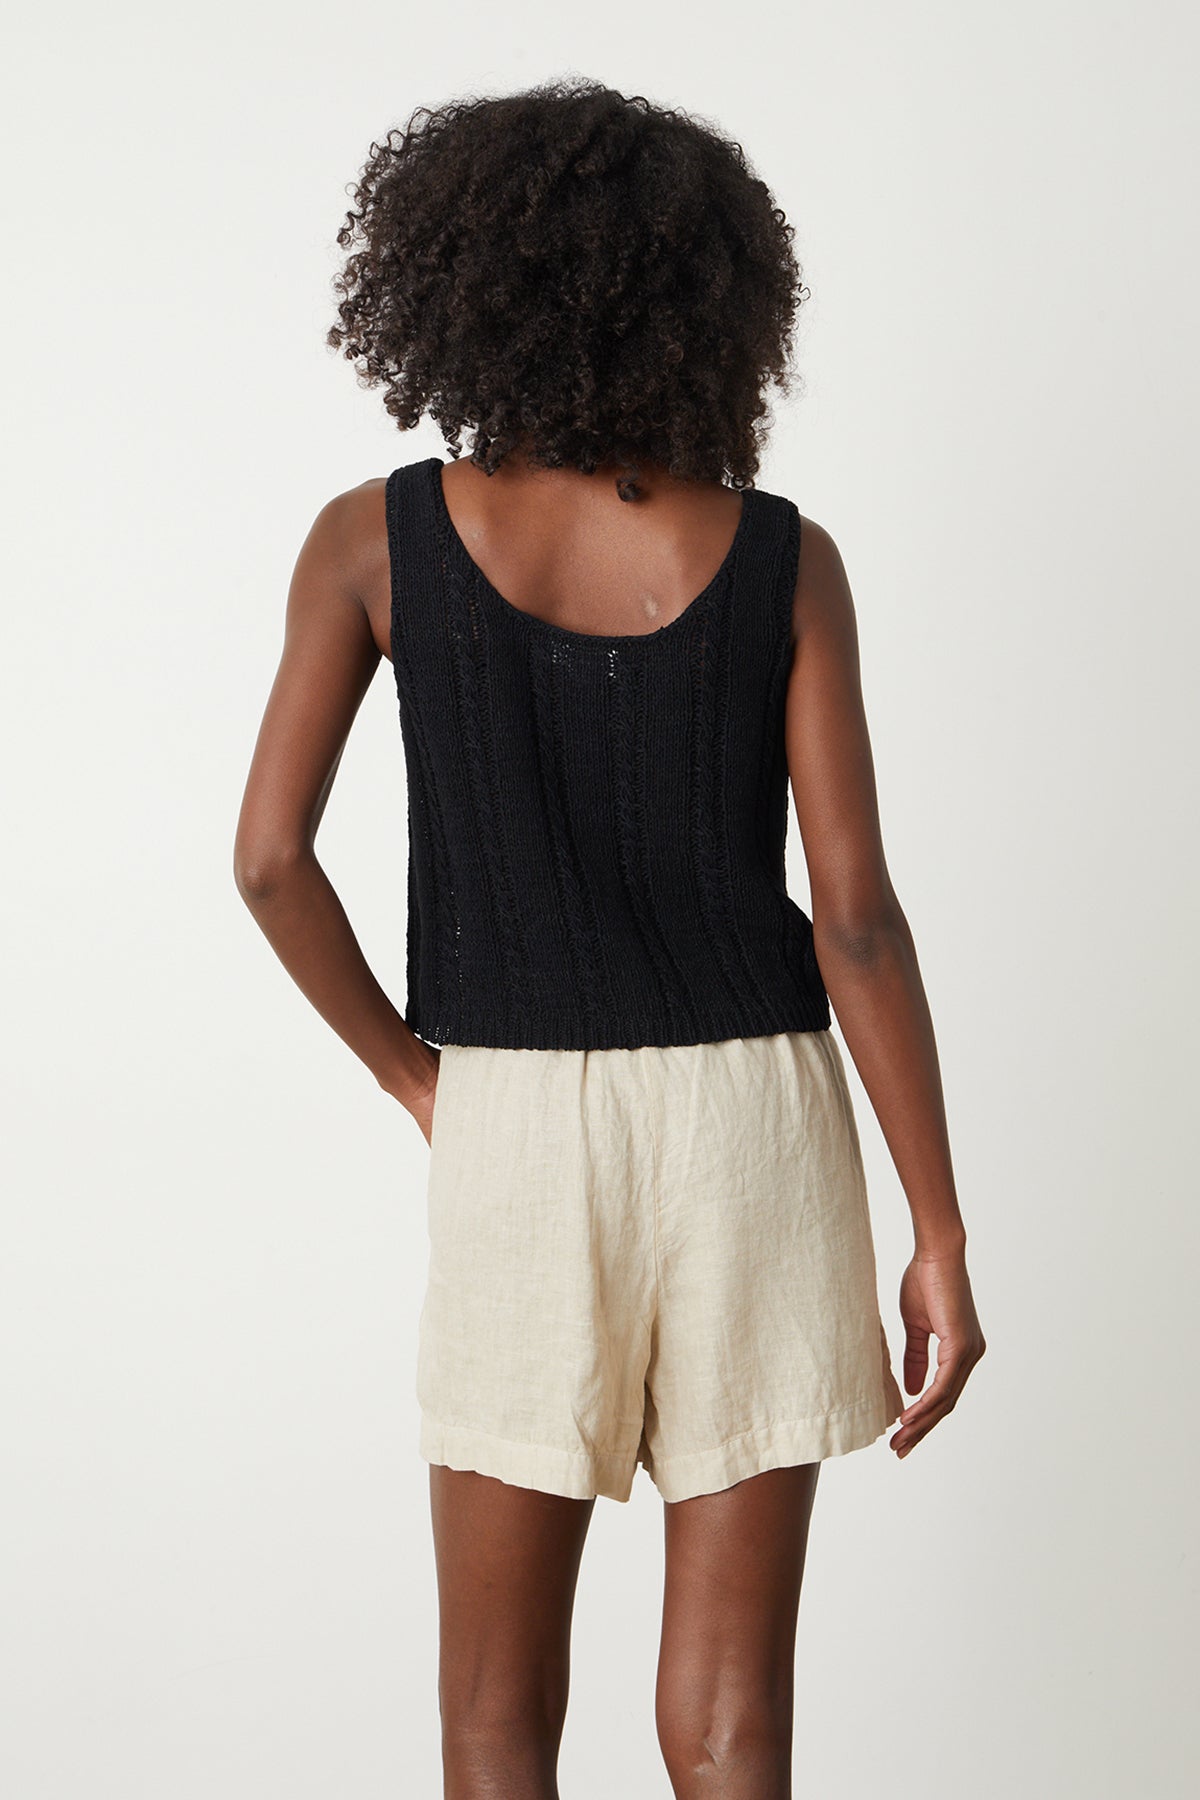 Layla Crochet Stitch Tank Top in black with Tammy short in sand back-26305204453569